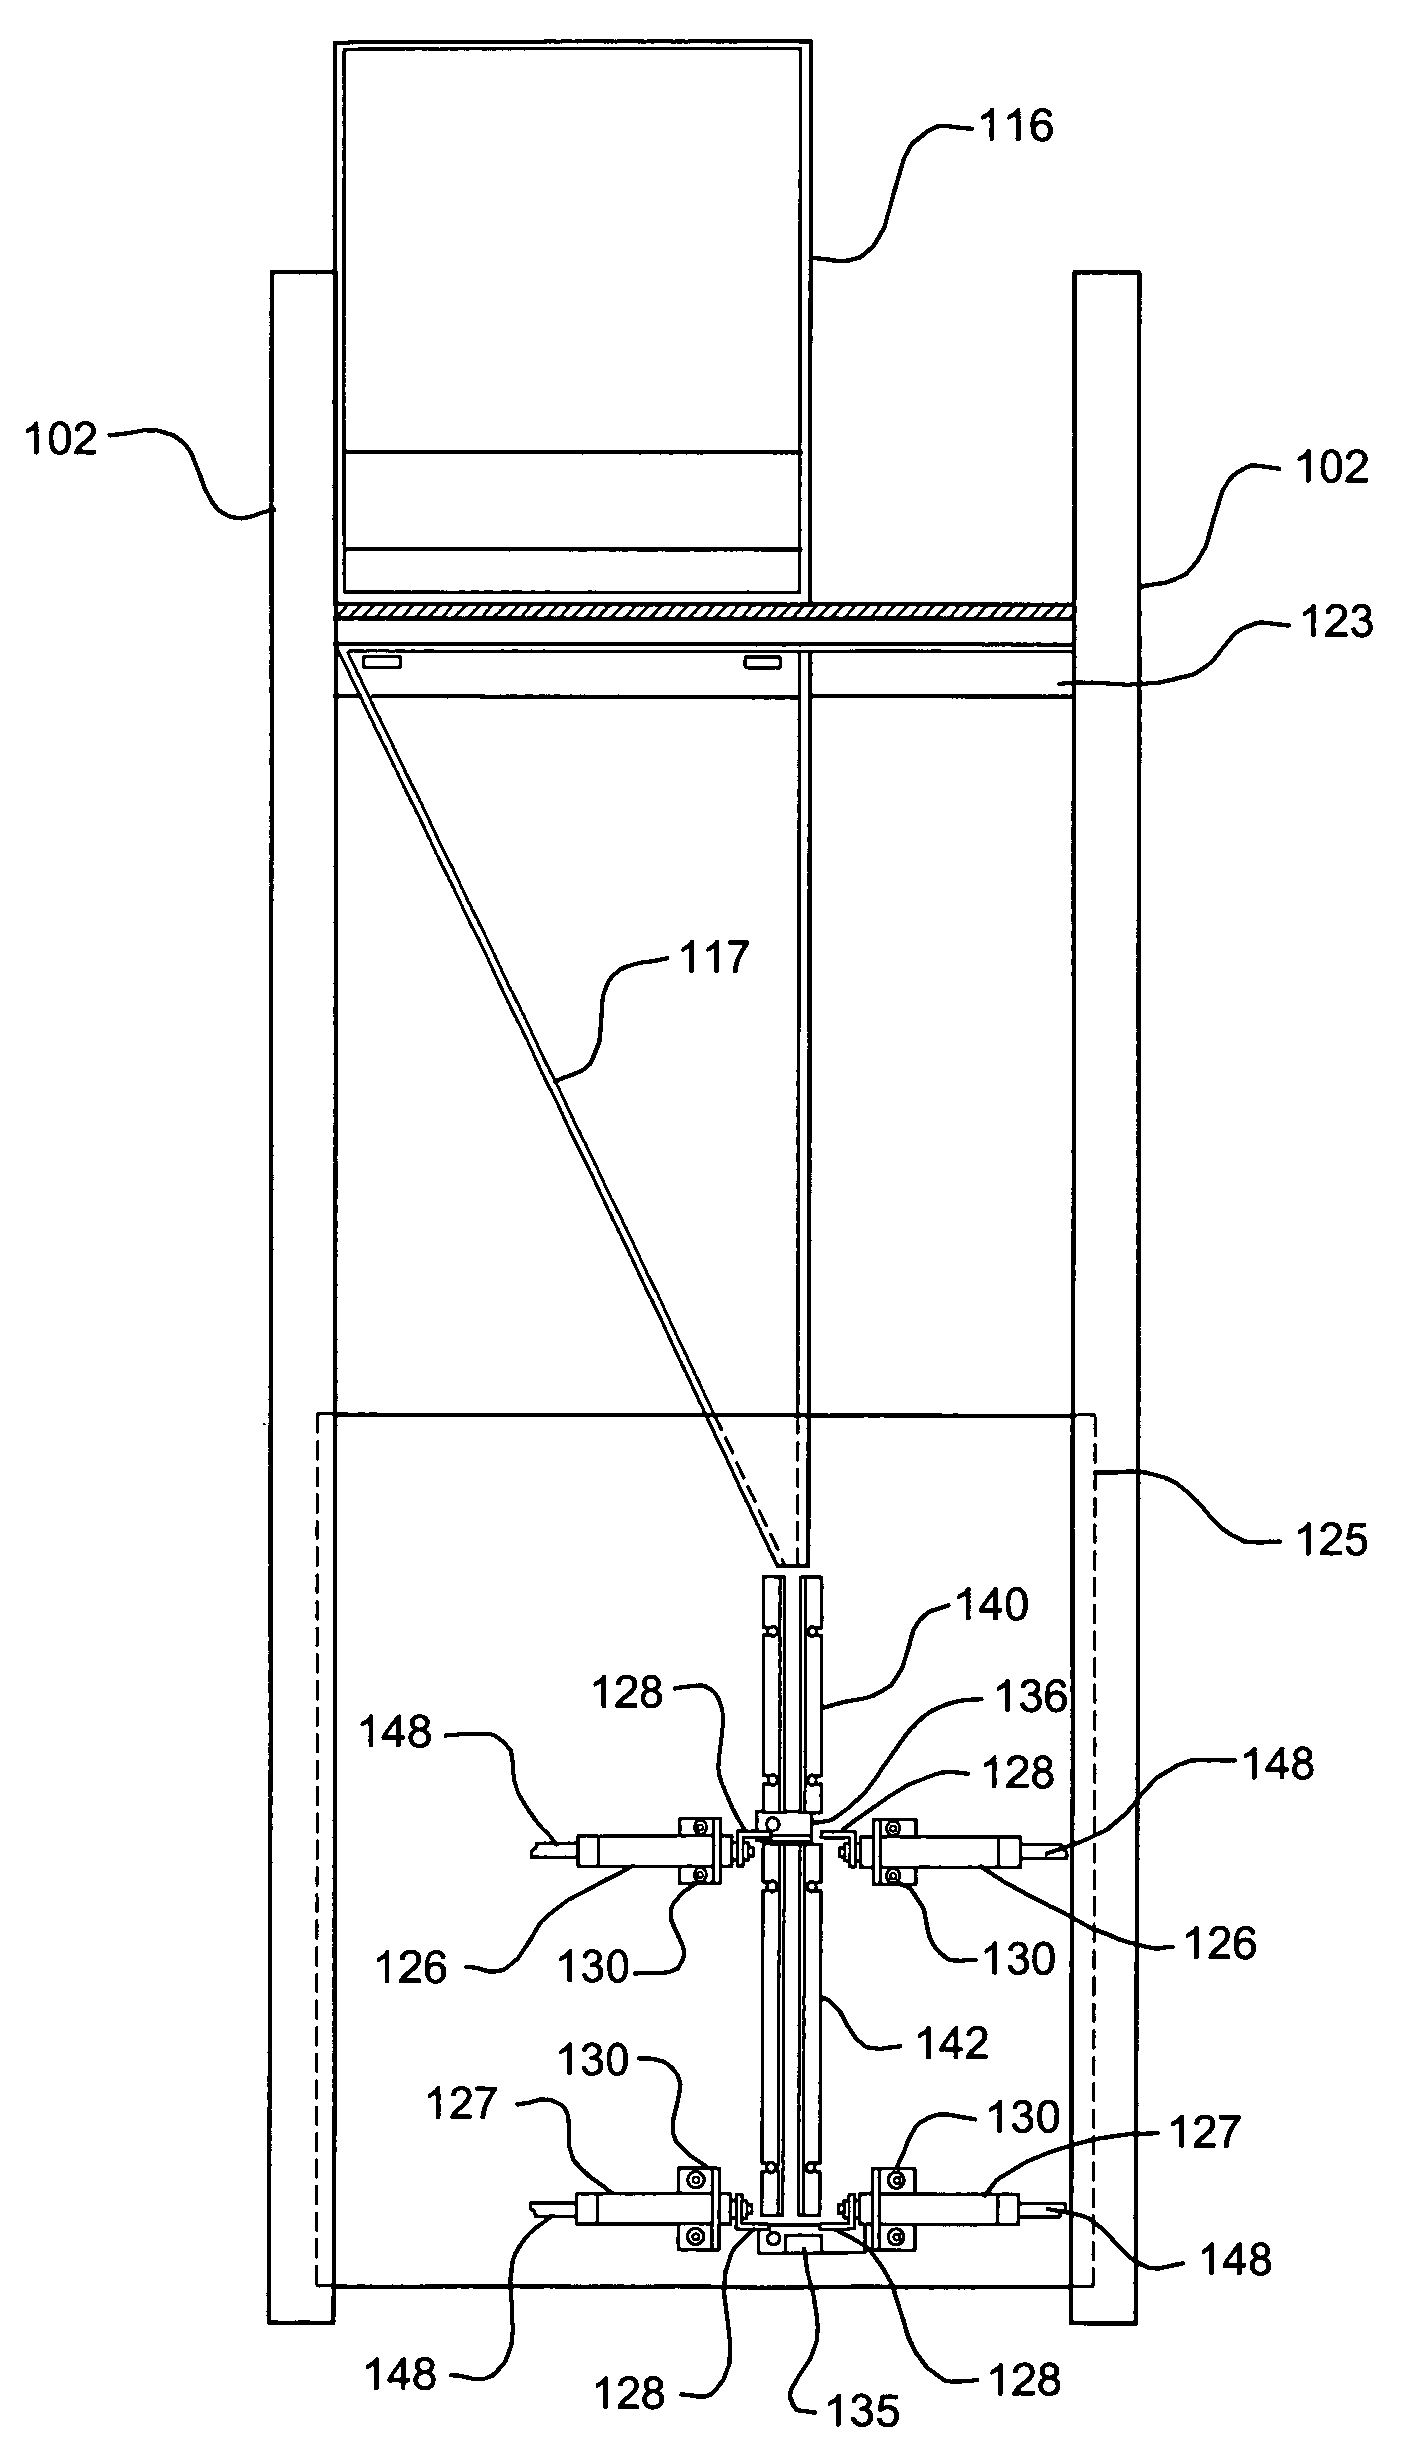 Straw-filling device